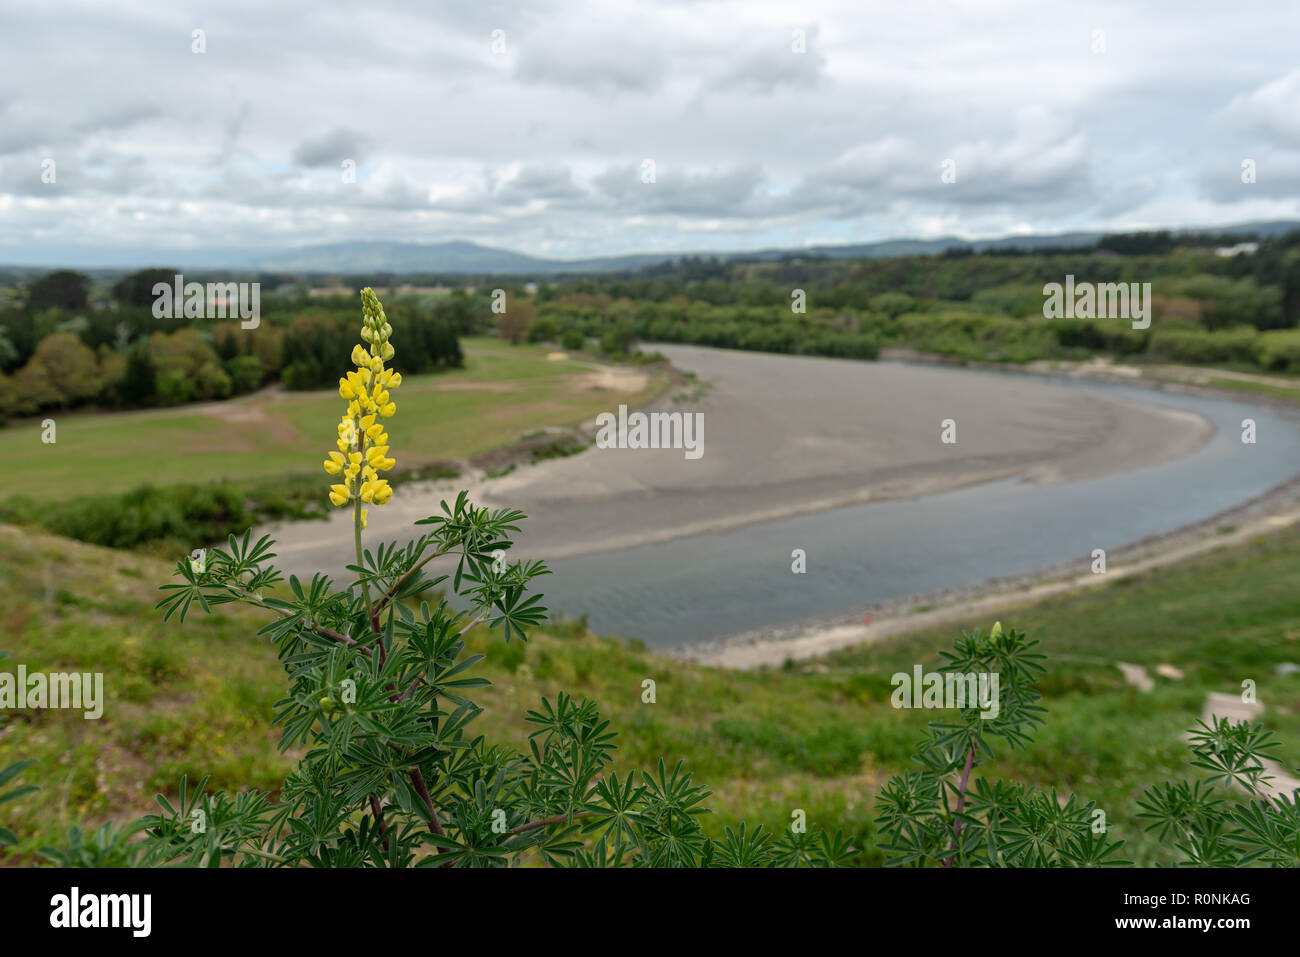 Cluster of yellow flowers in a conical shape against a blurred background of a river and lush foliage Stock Photo